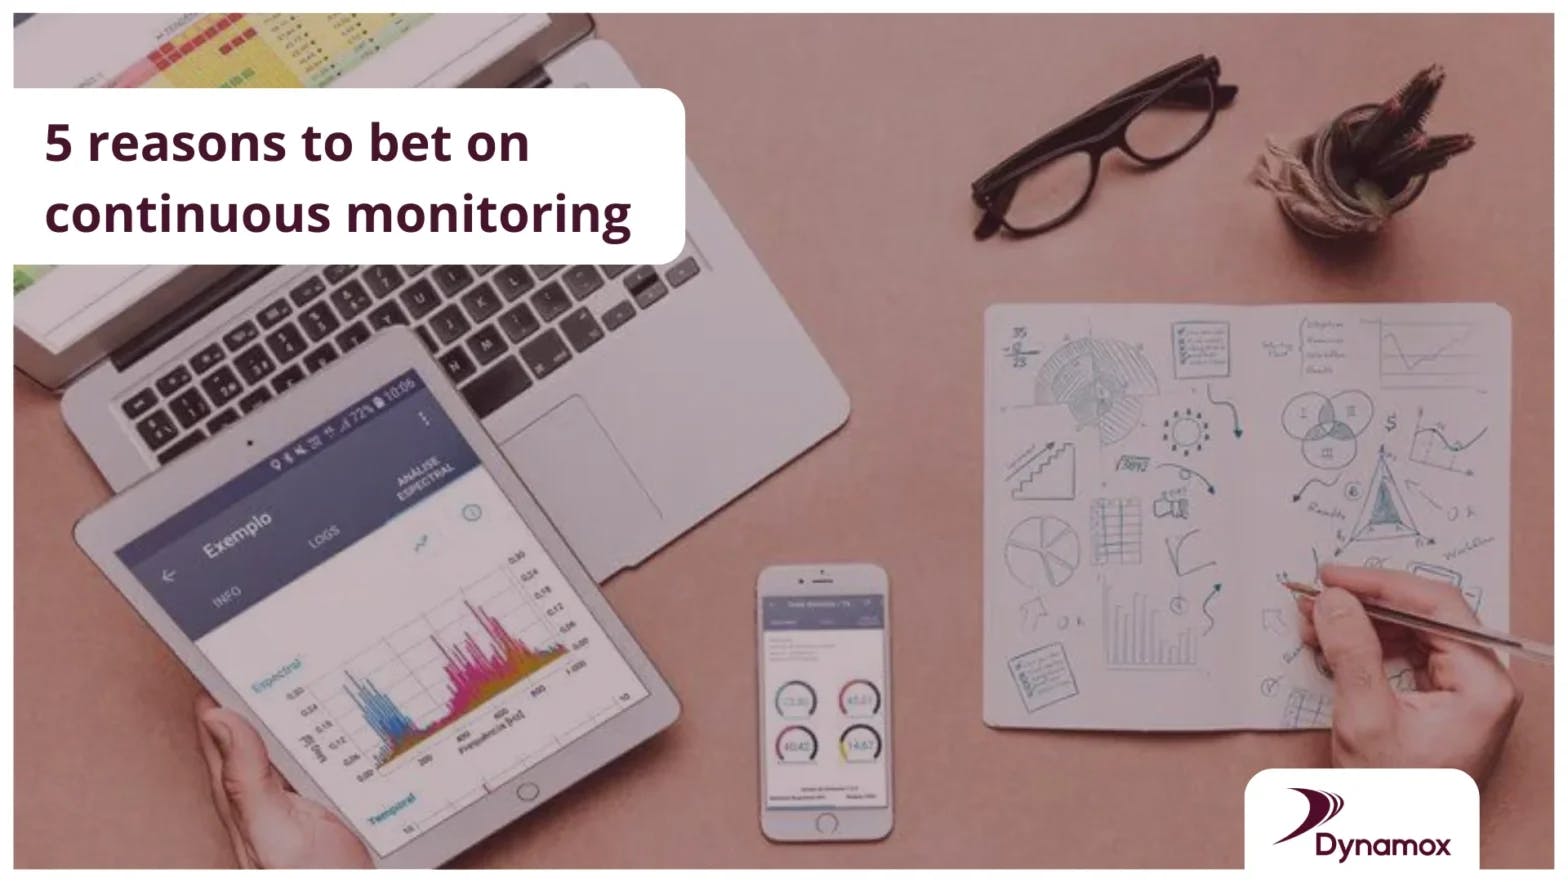 5 reasons to bet on continuous monitoring